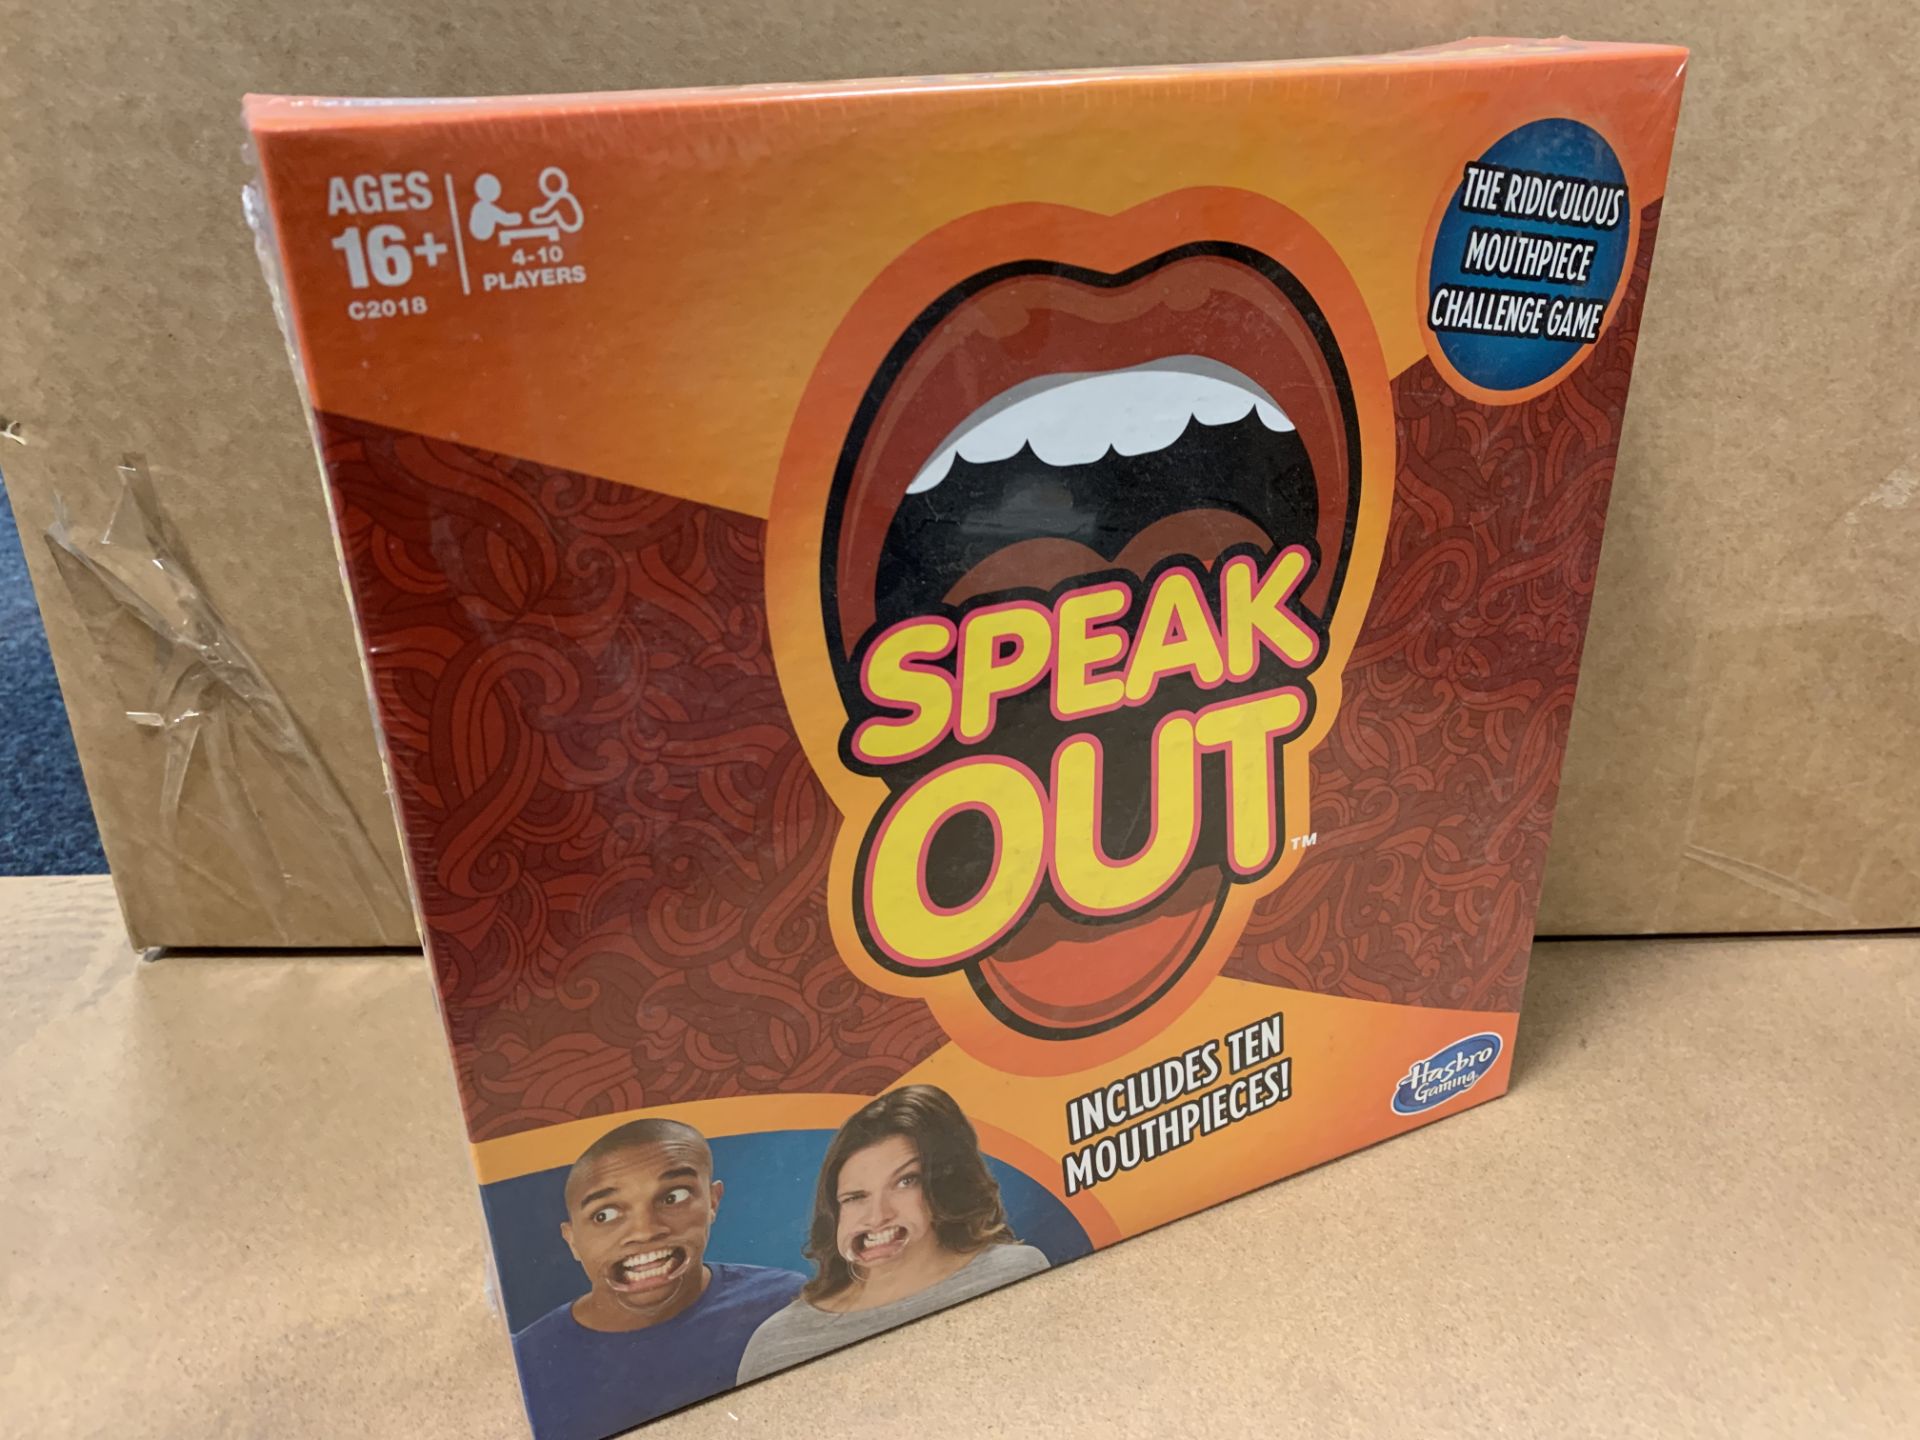 18 X NEW BOXED HASBRO SPEAK OUT - THE RIDICULOUS MOUTHPIECE CHALLENGE GAME